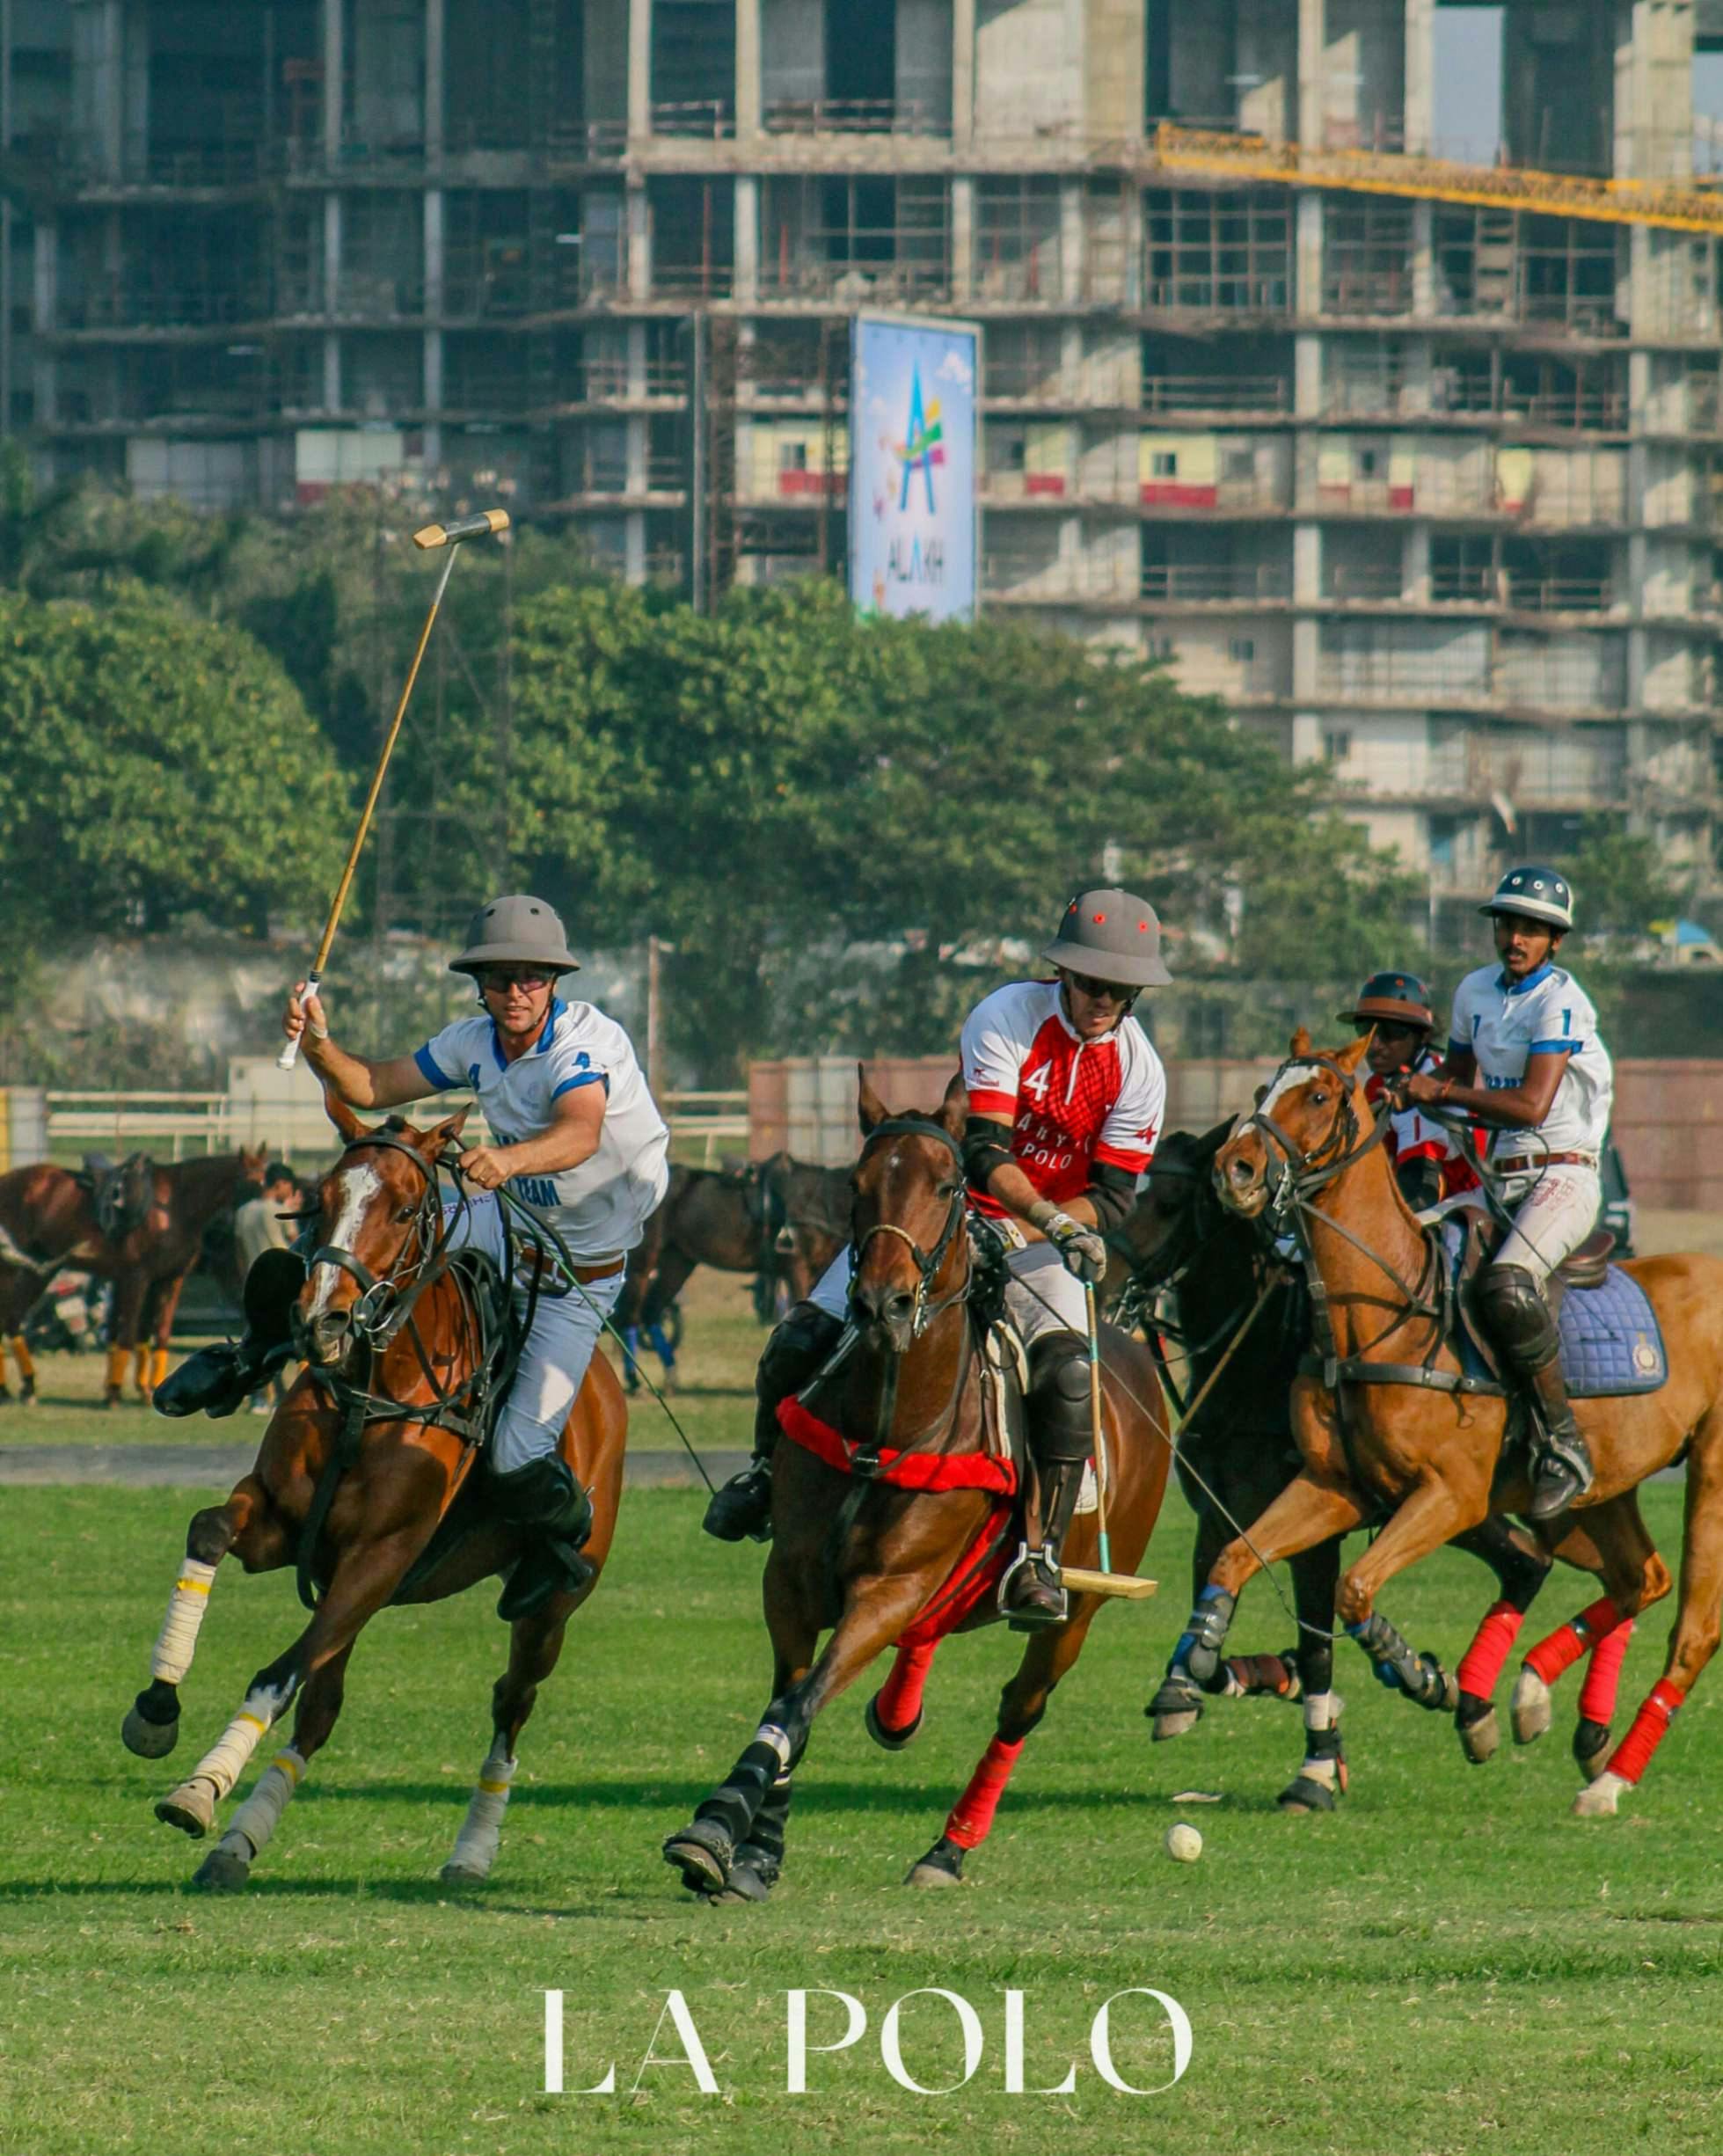 The challenge of competing against skilled opponents is what makes polo exciting.